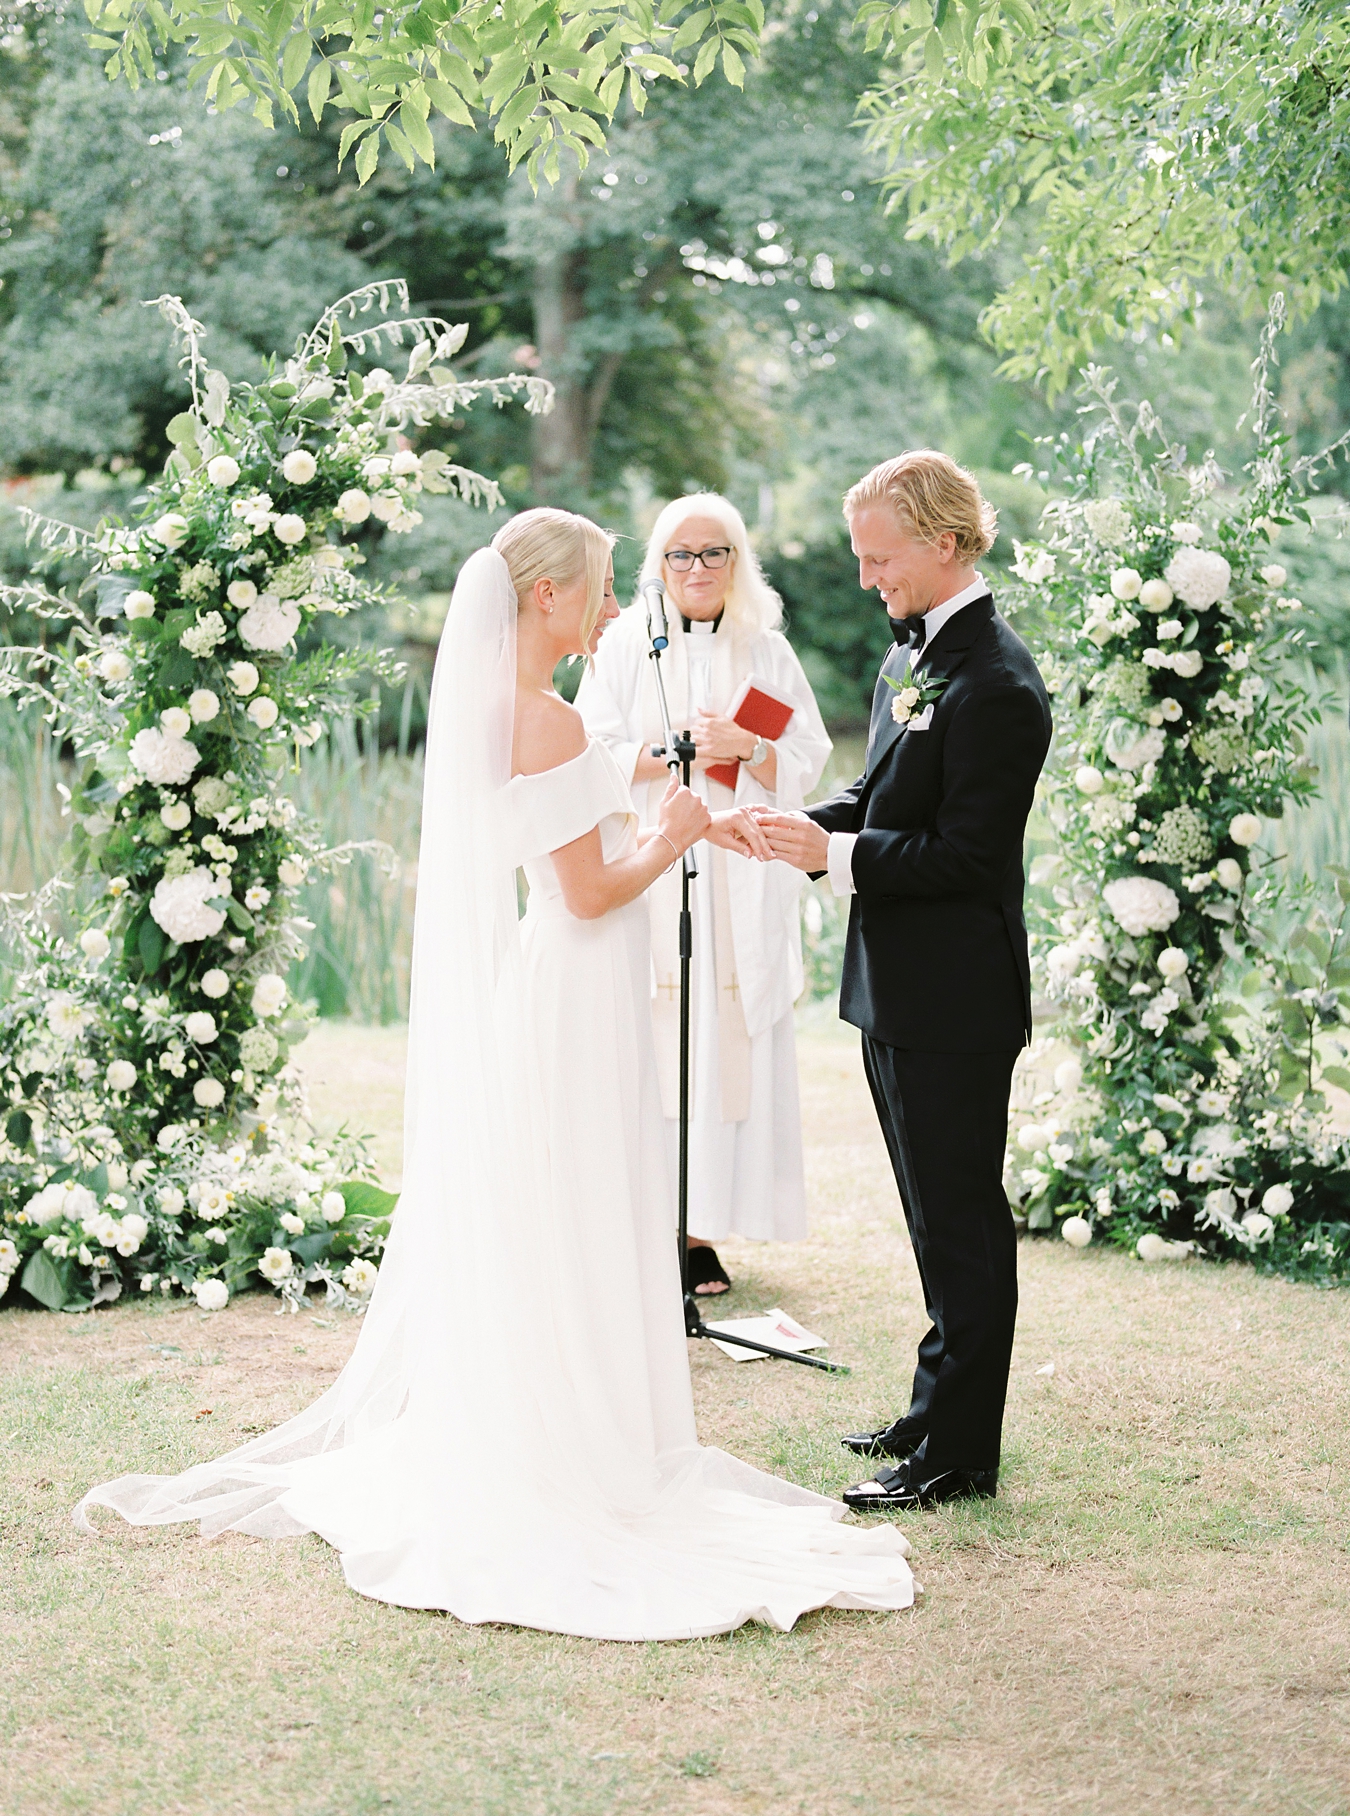 bride and groom exchange rings in front of a large floral arch filled with white flowers and greenery